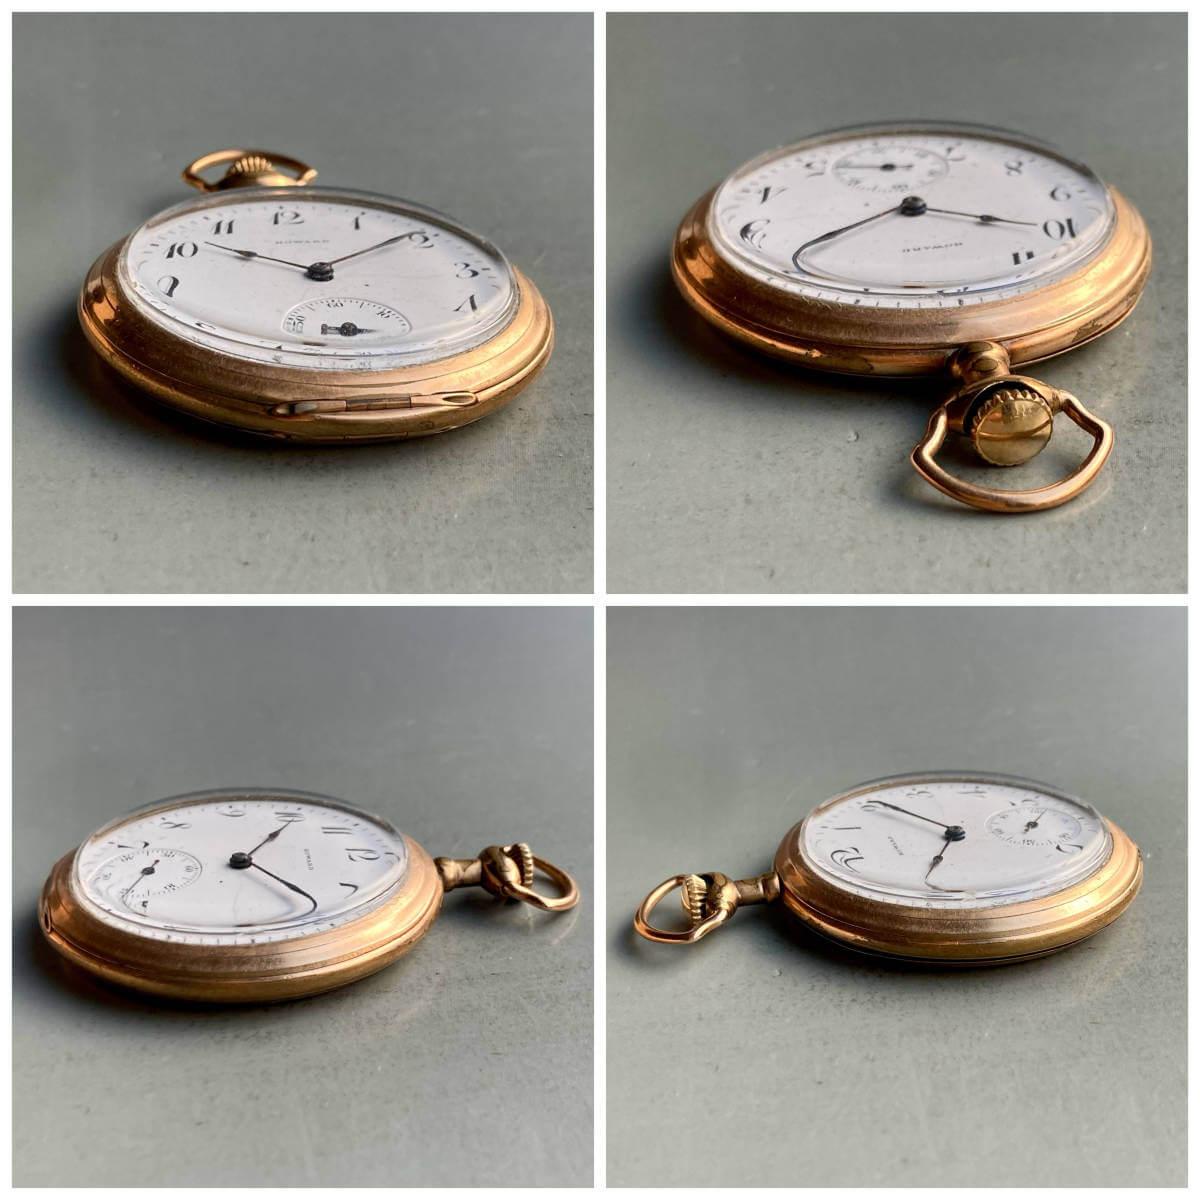 Howard Pocket Watch Antique Manual Gold Case 48mm Vintage Open Face - Murphy Johnson Watches Co.